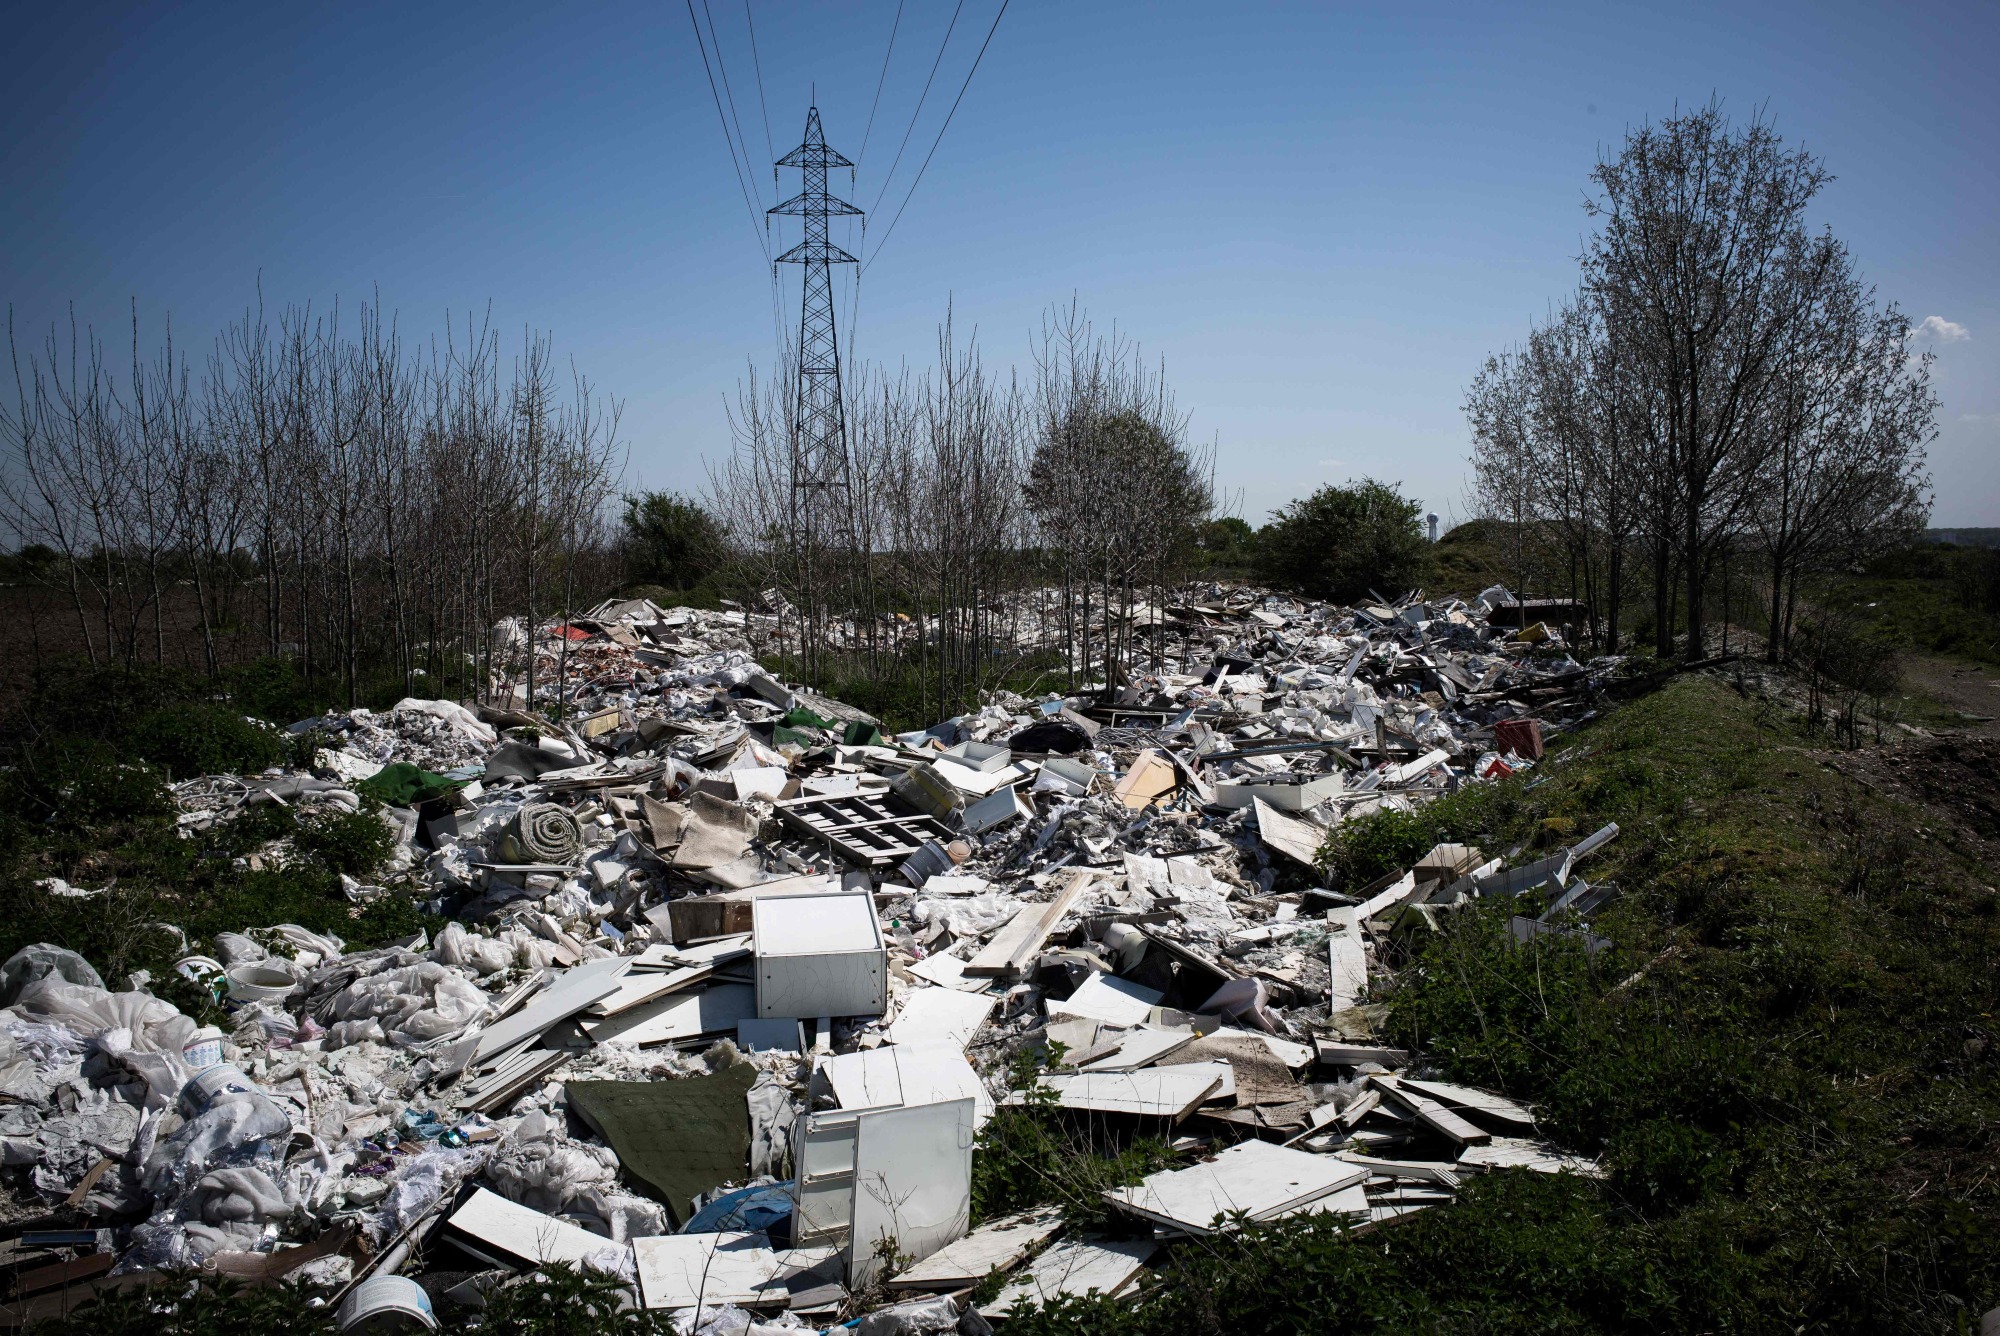 An open air dump is seen in April in the plain of Triel and Carrières at Carrières-sous-Poissy some 30 km northwest of Paris. | AFP-JIJI